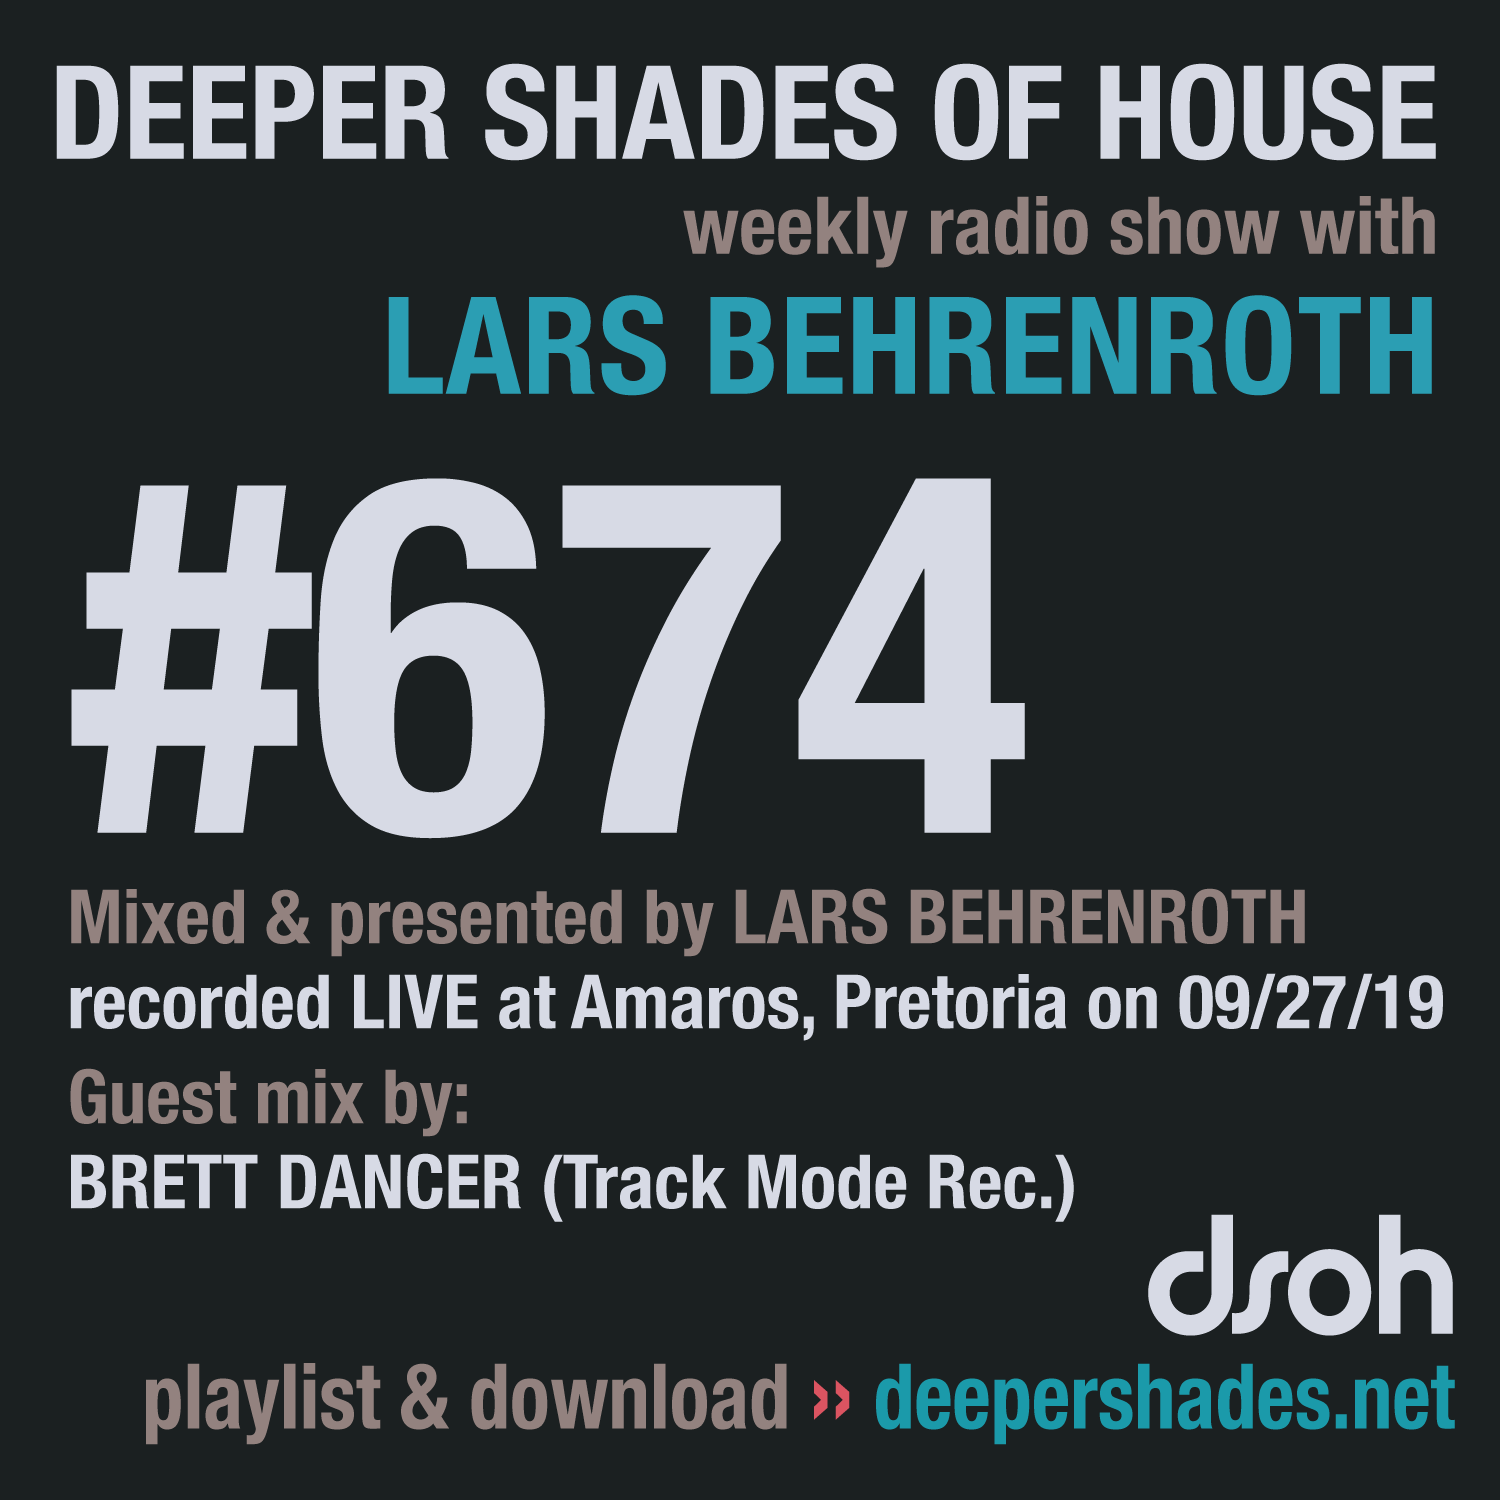 Deeper Shades Of House 674